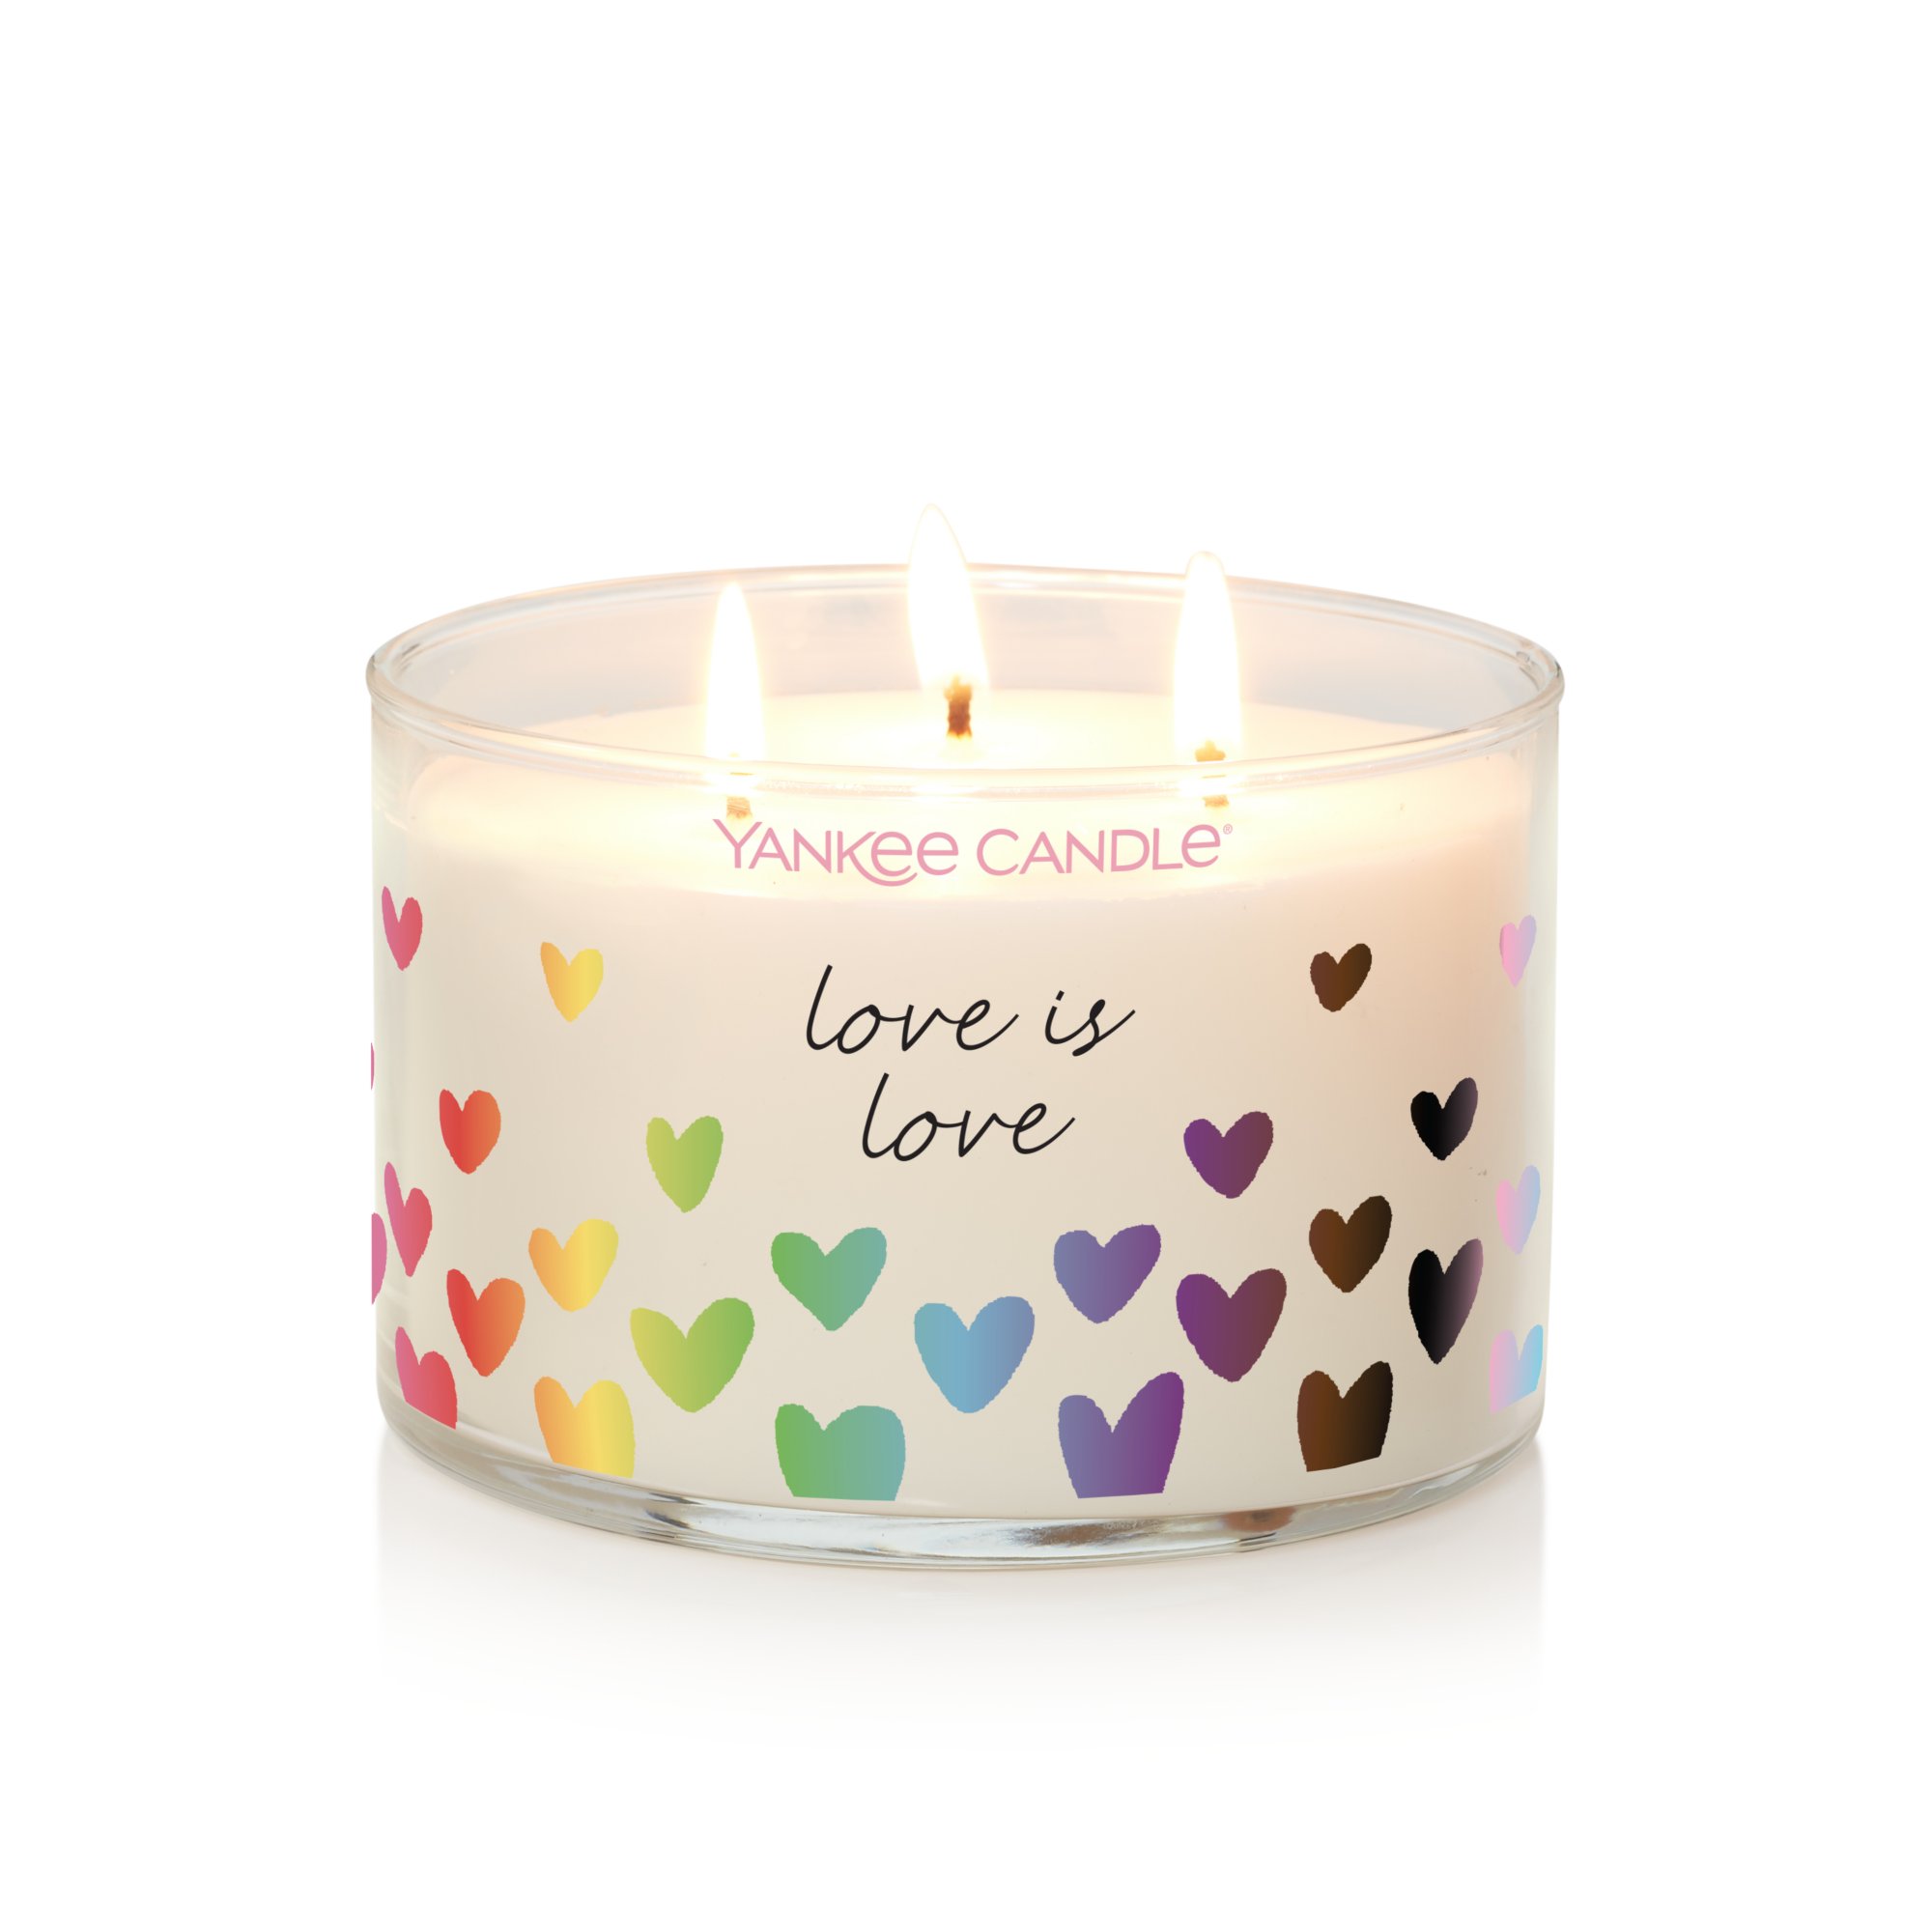 Love is Love 3-Wick Candles - 3-Wick Candles